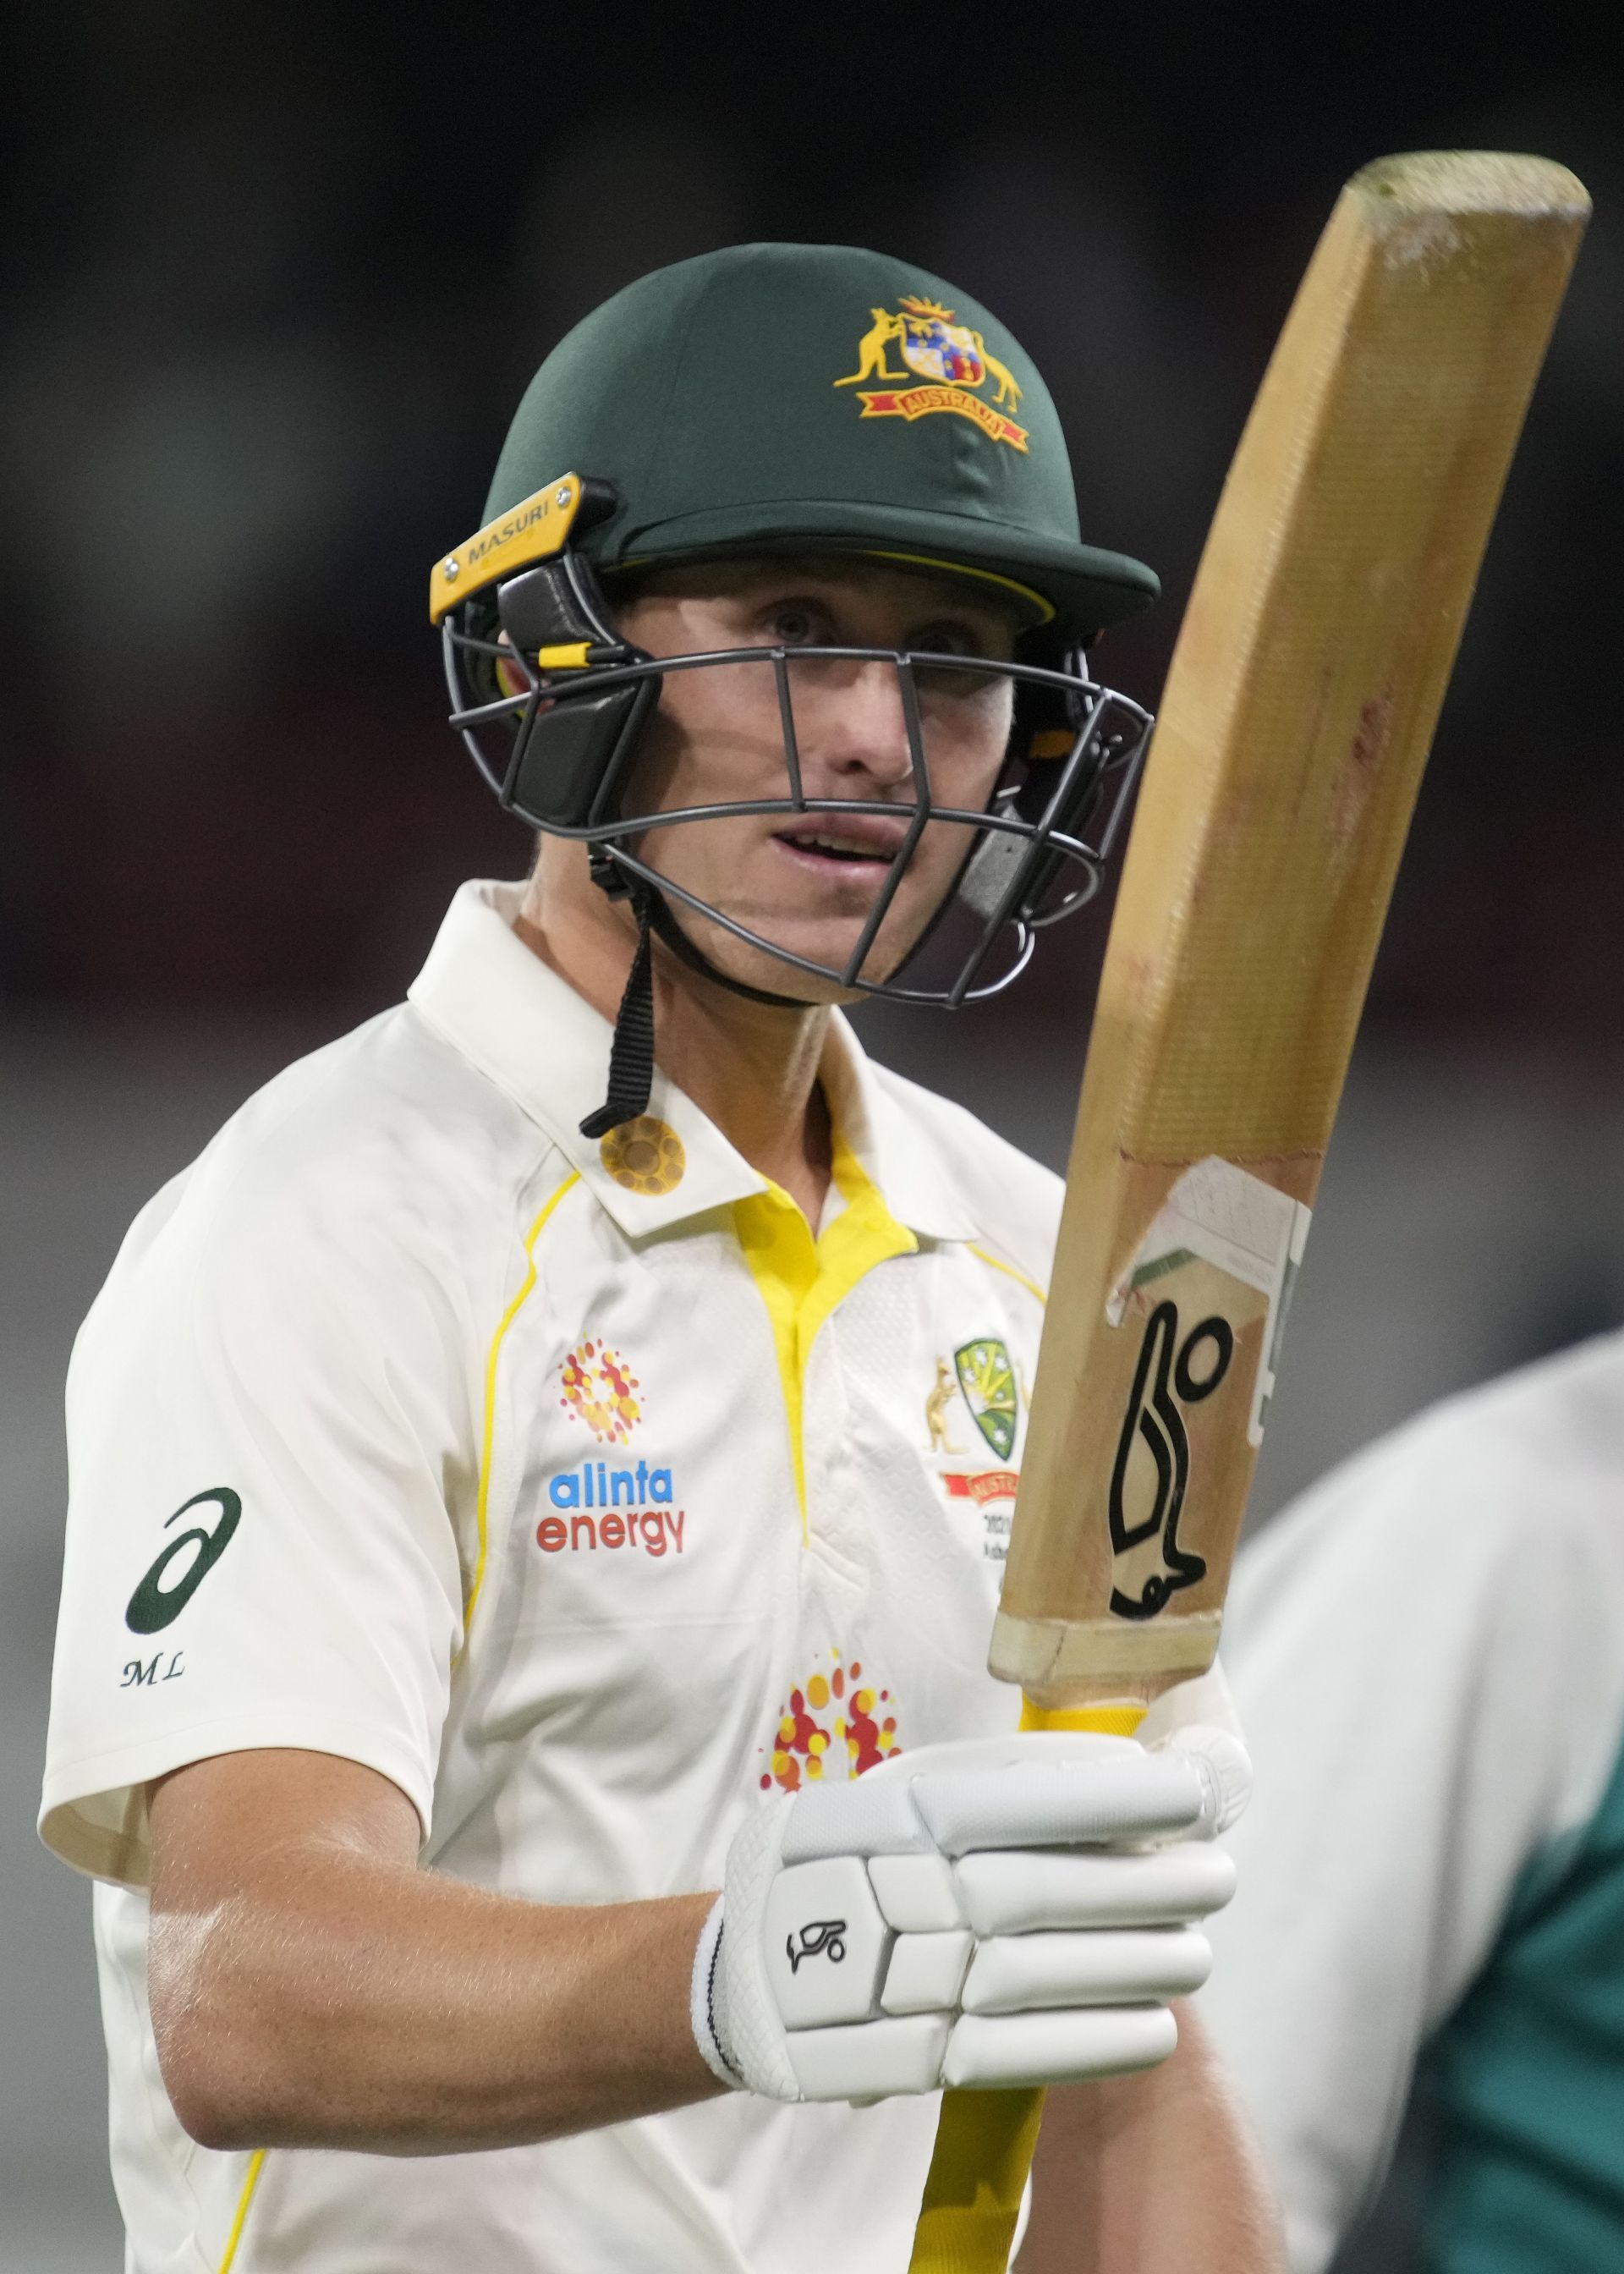 Marnus Labuschagne starred for Australia with the bat in the 2nd Ashes Test (Credit: Getty Images)